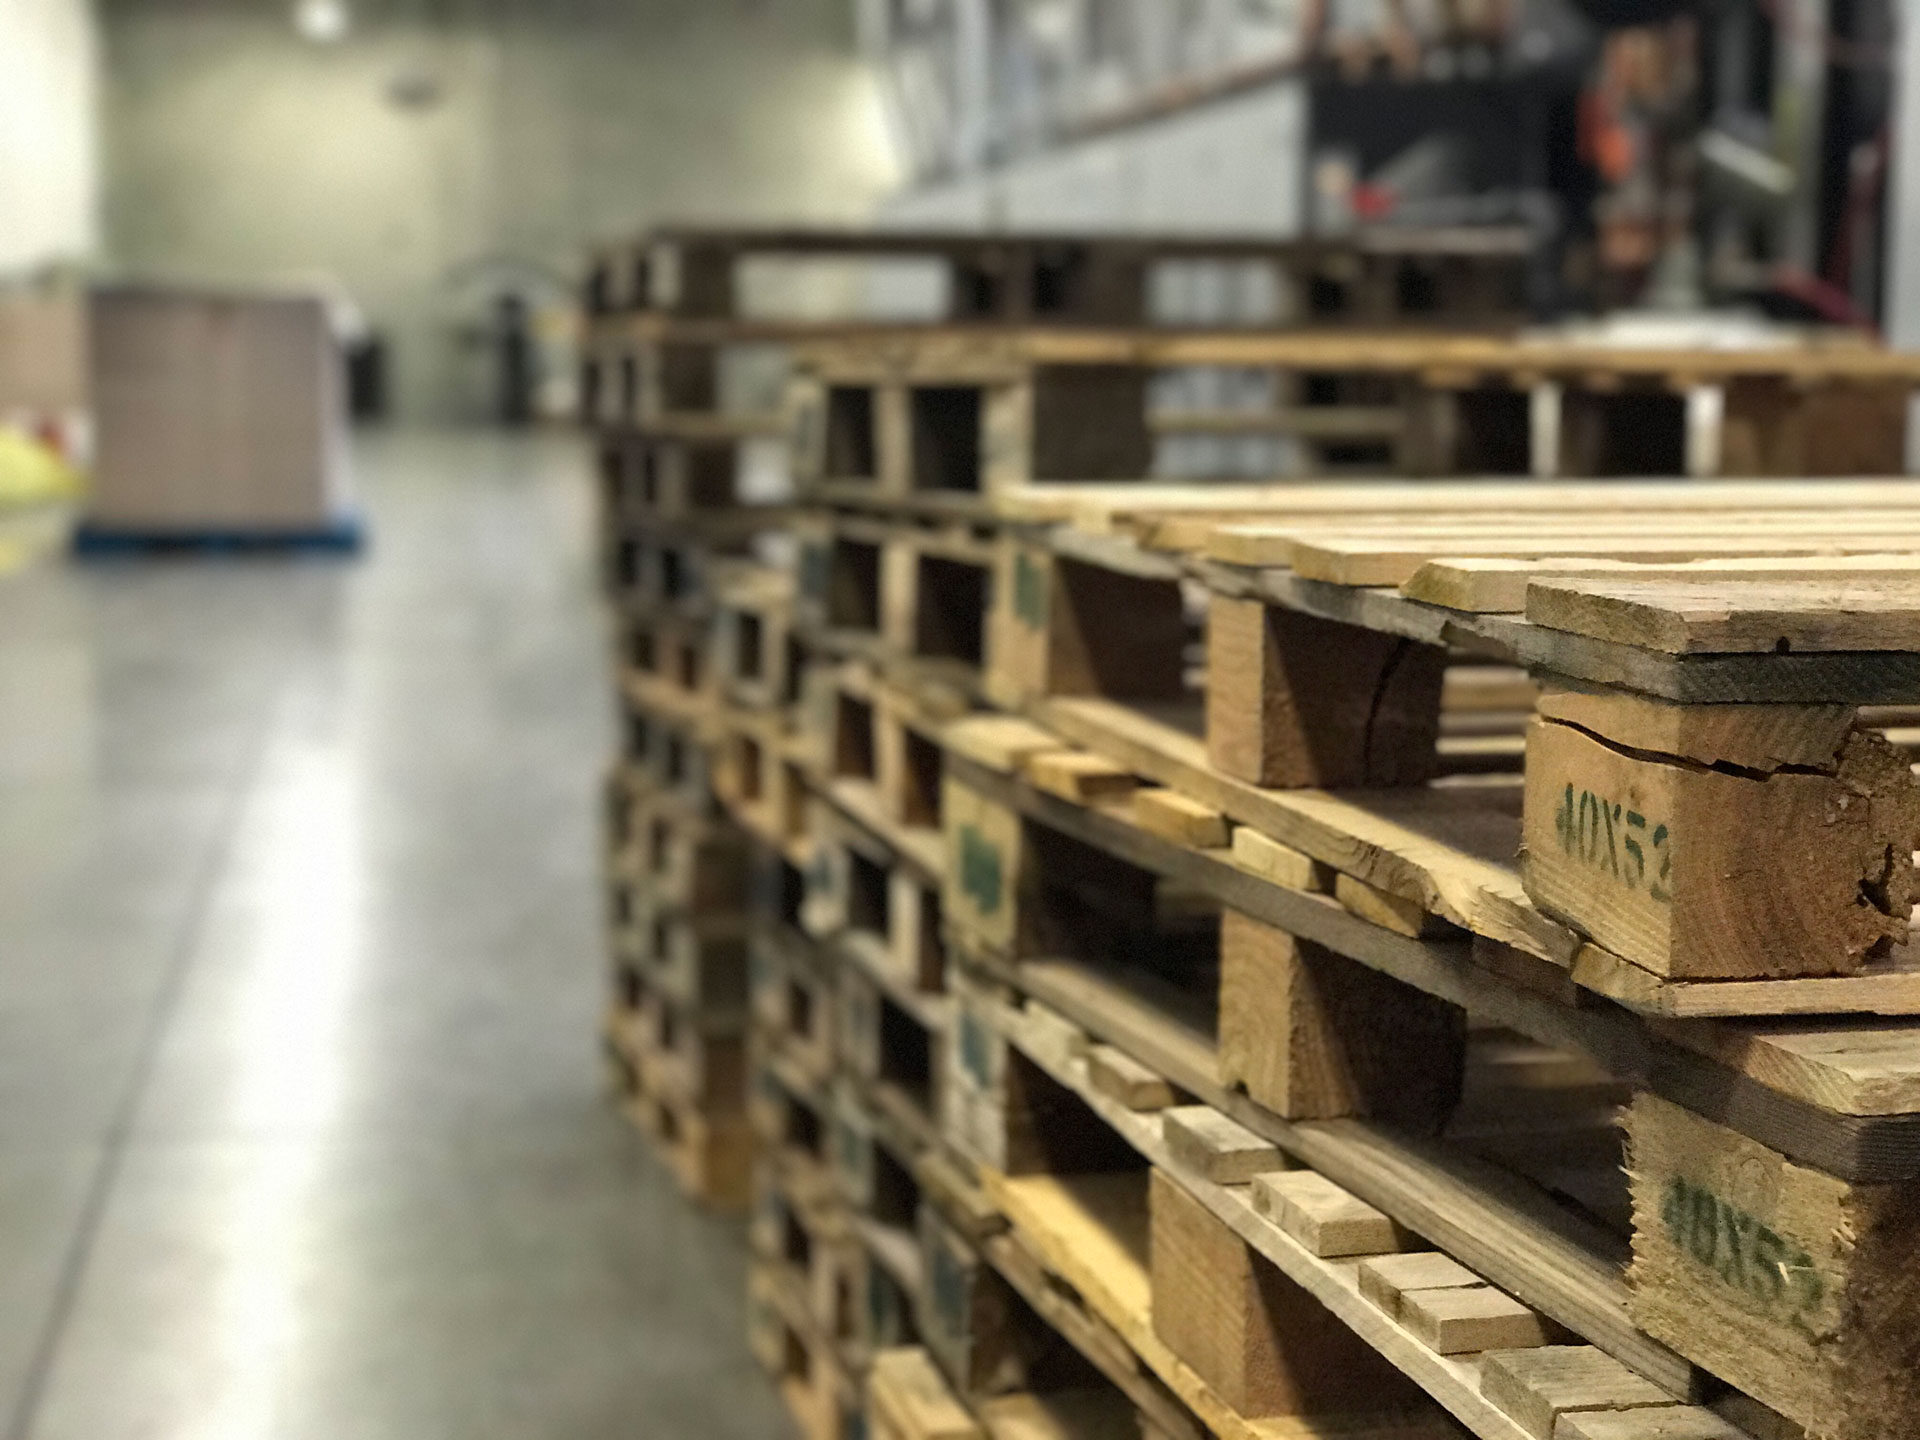 Safe Spacing Matters: Pallet Load Clearance Recommendations For